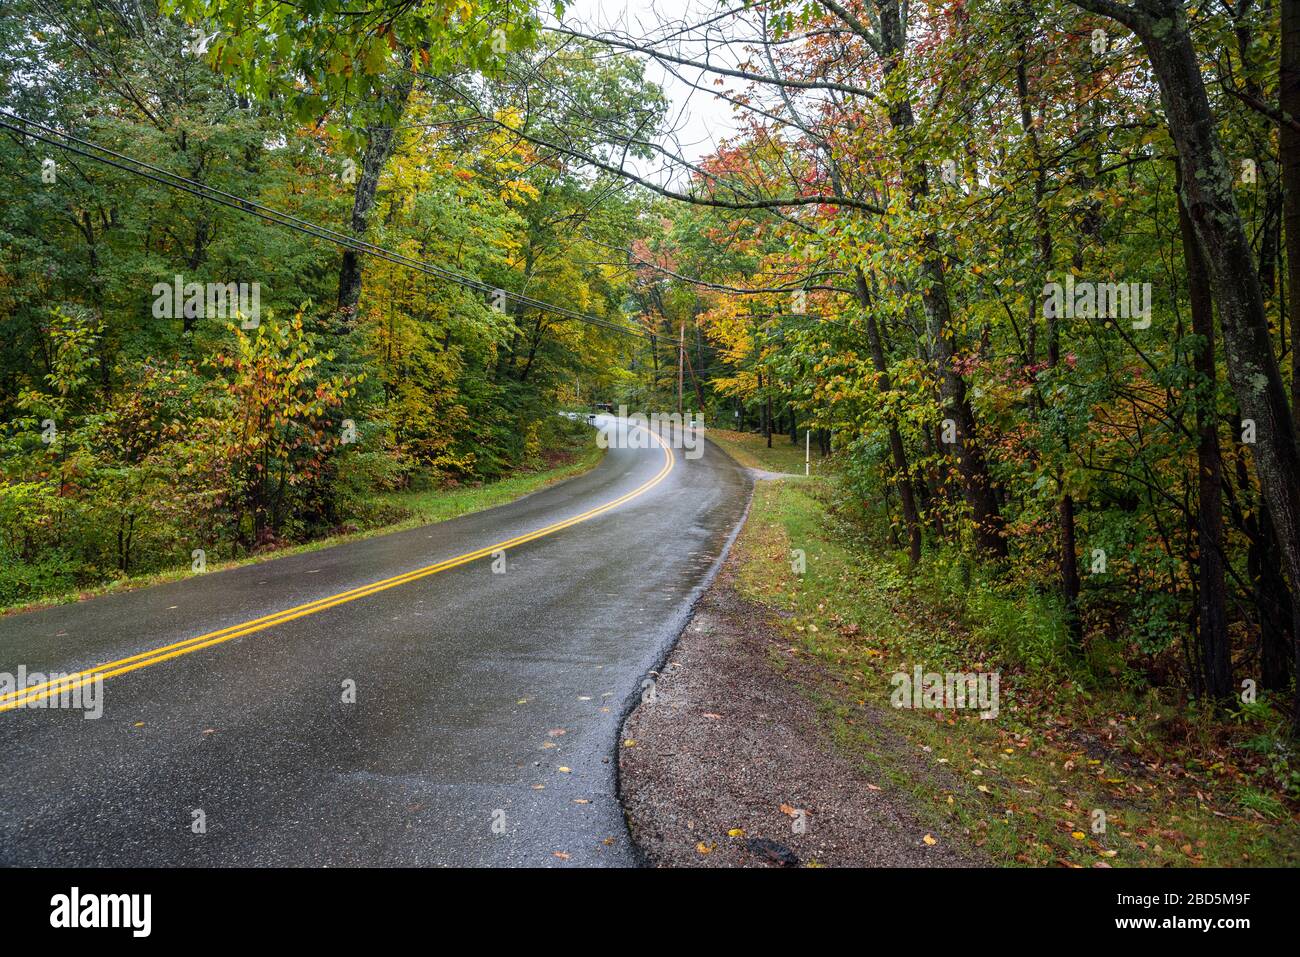 Empty winding back road through a deciduous forest on a rainy autumn day Stock Photo